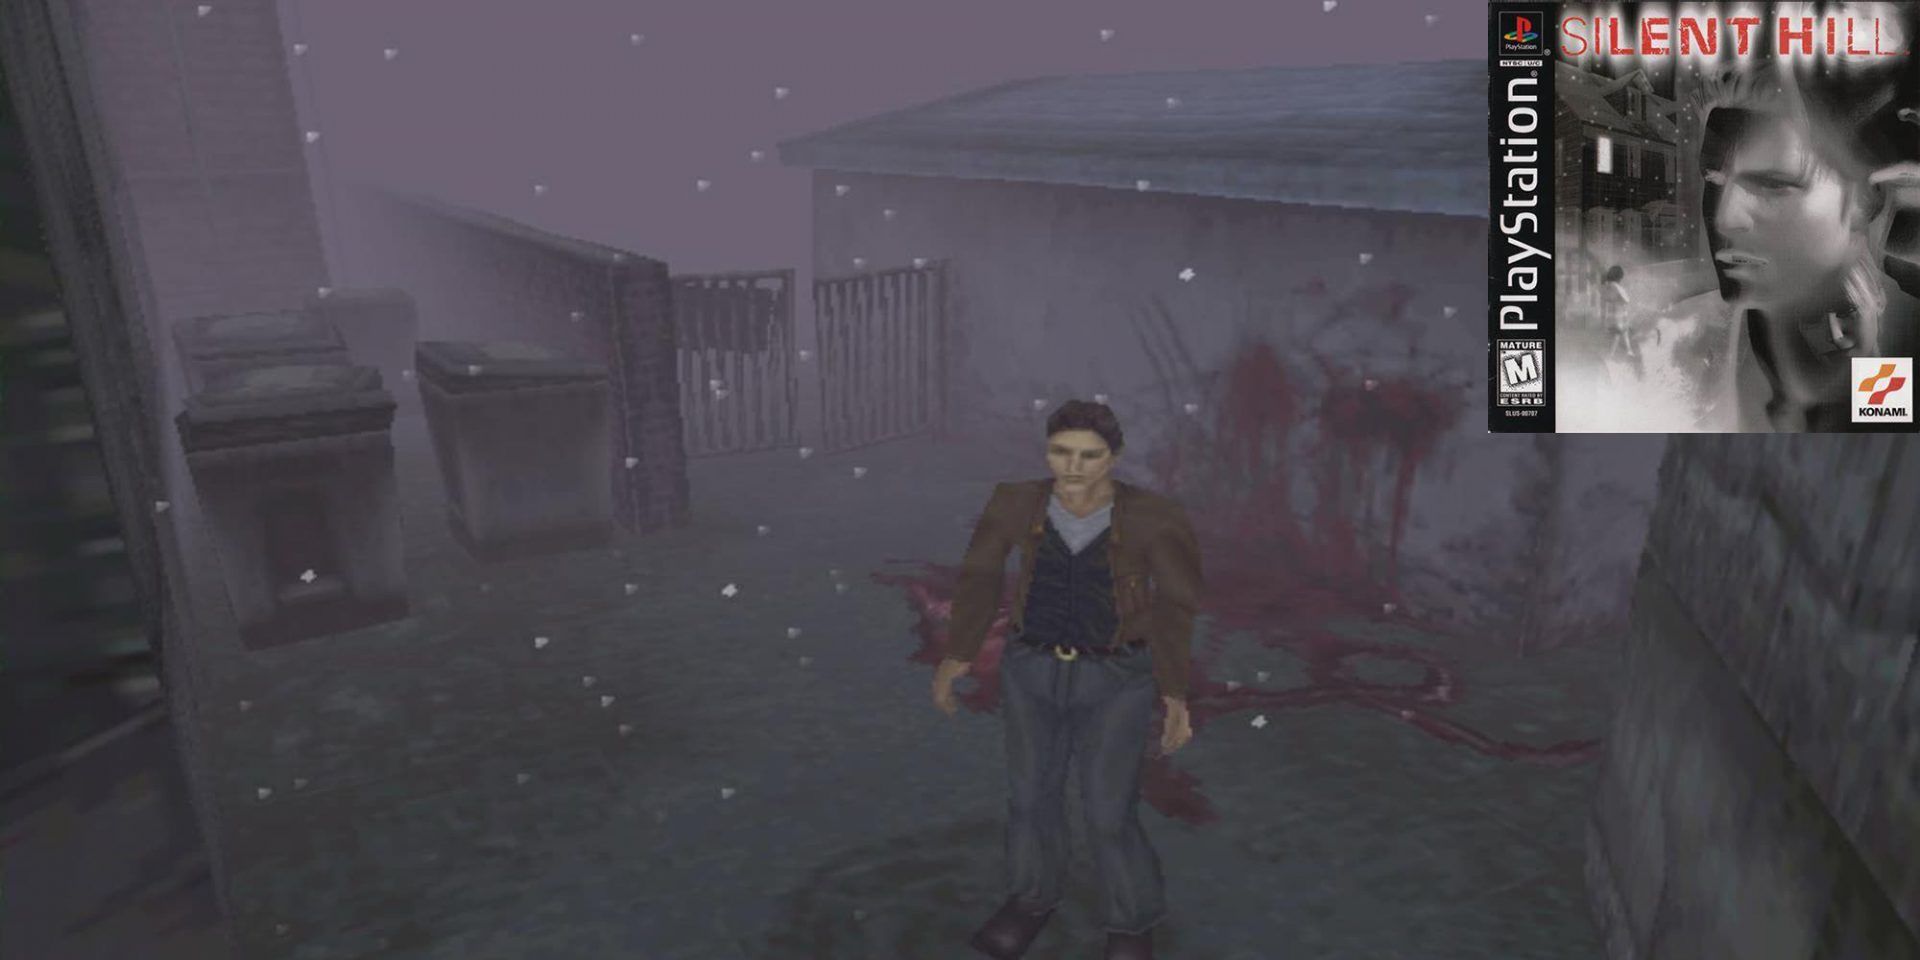 Screenshot from Silent Hill PS1, with the game's cover in the top right corner.